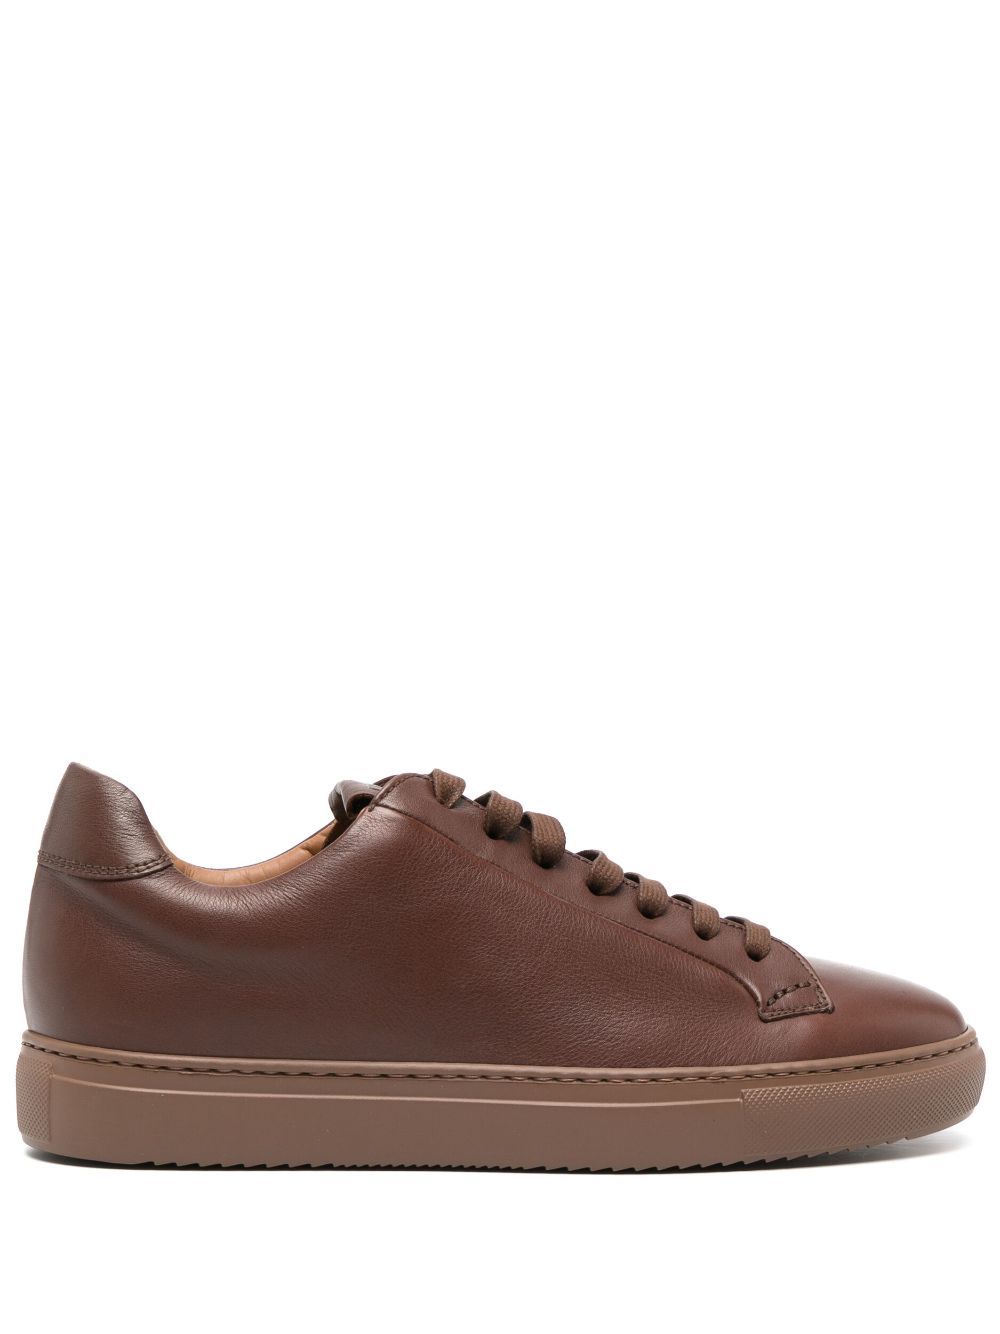 Doucal's logo-debossed leather sneakers - Brown von Doucal's